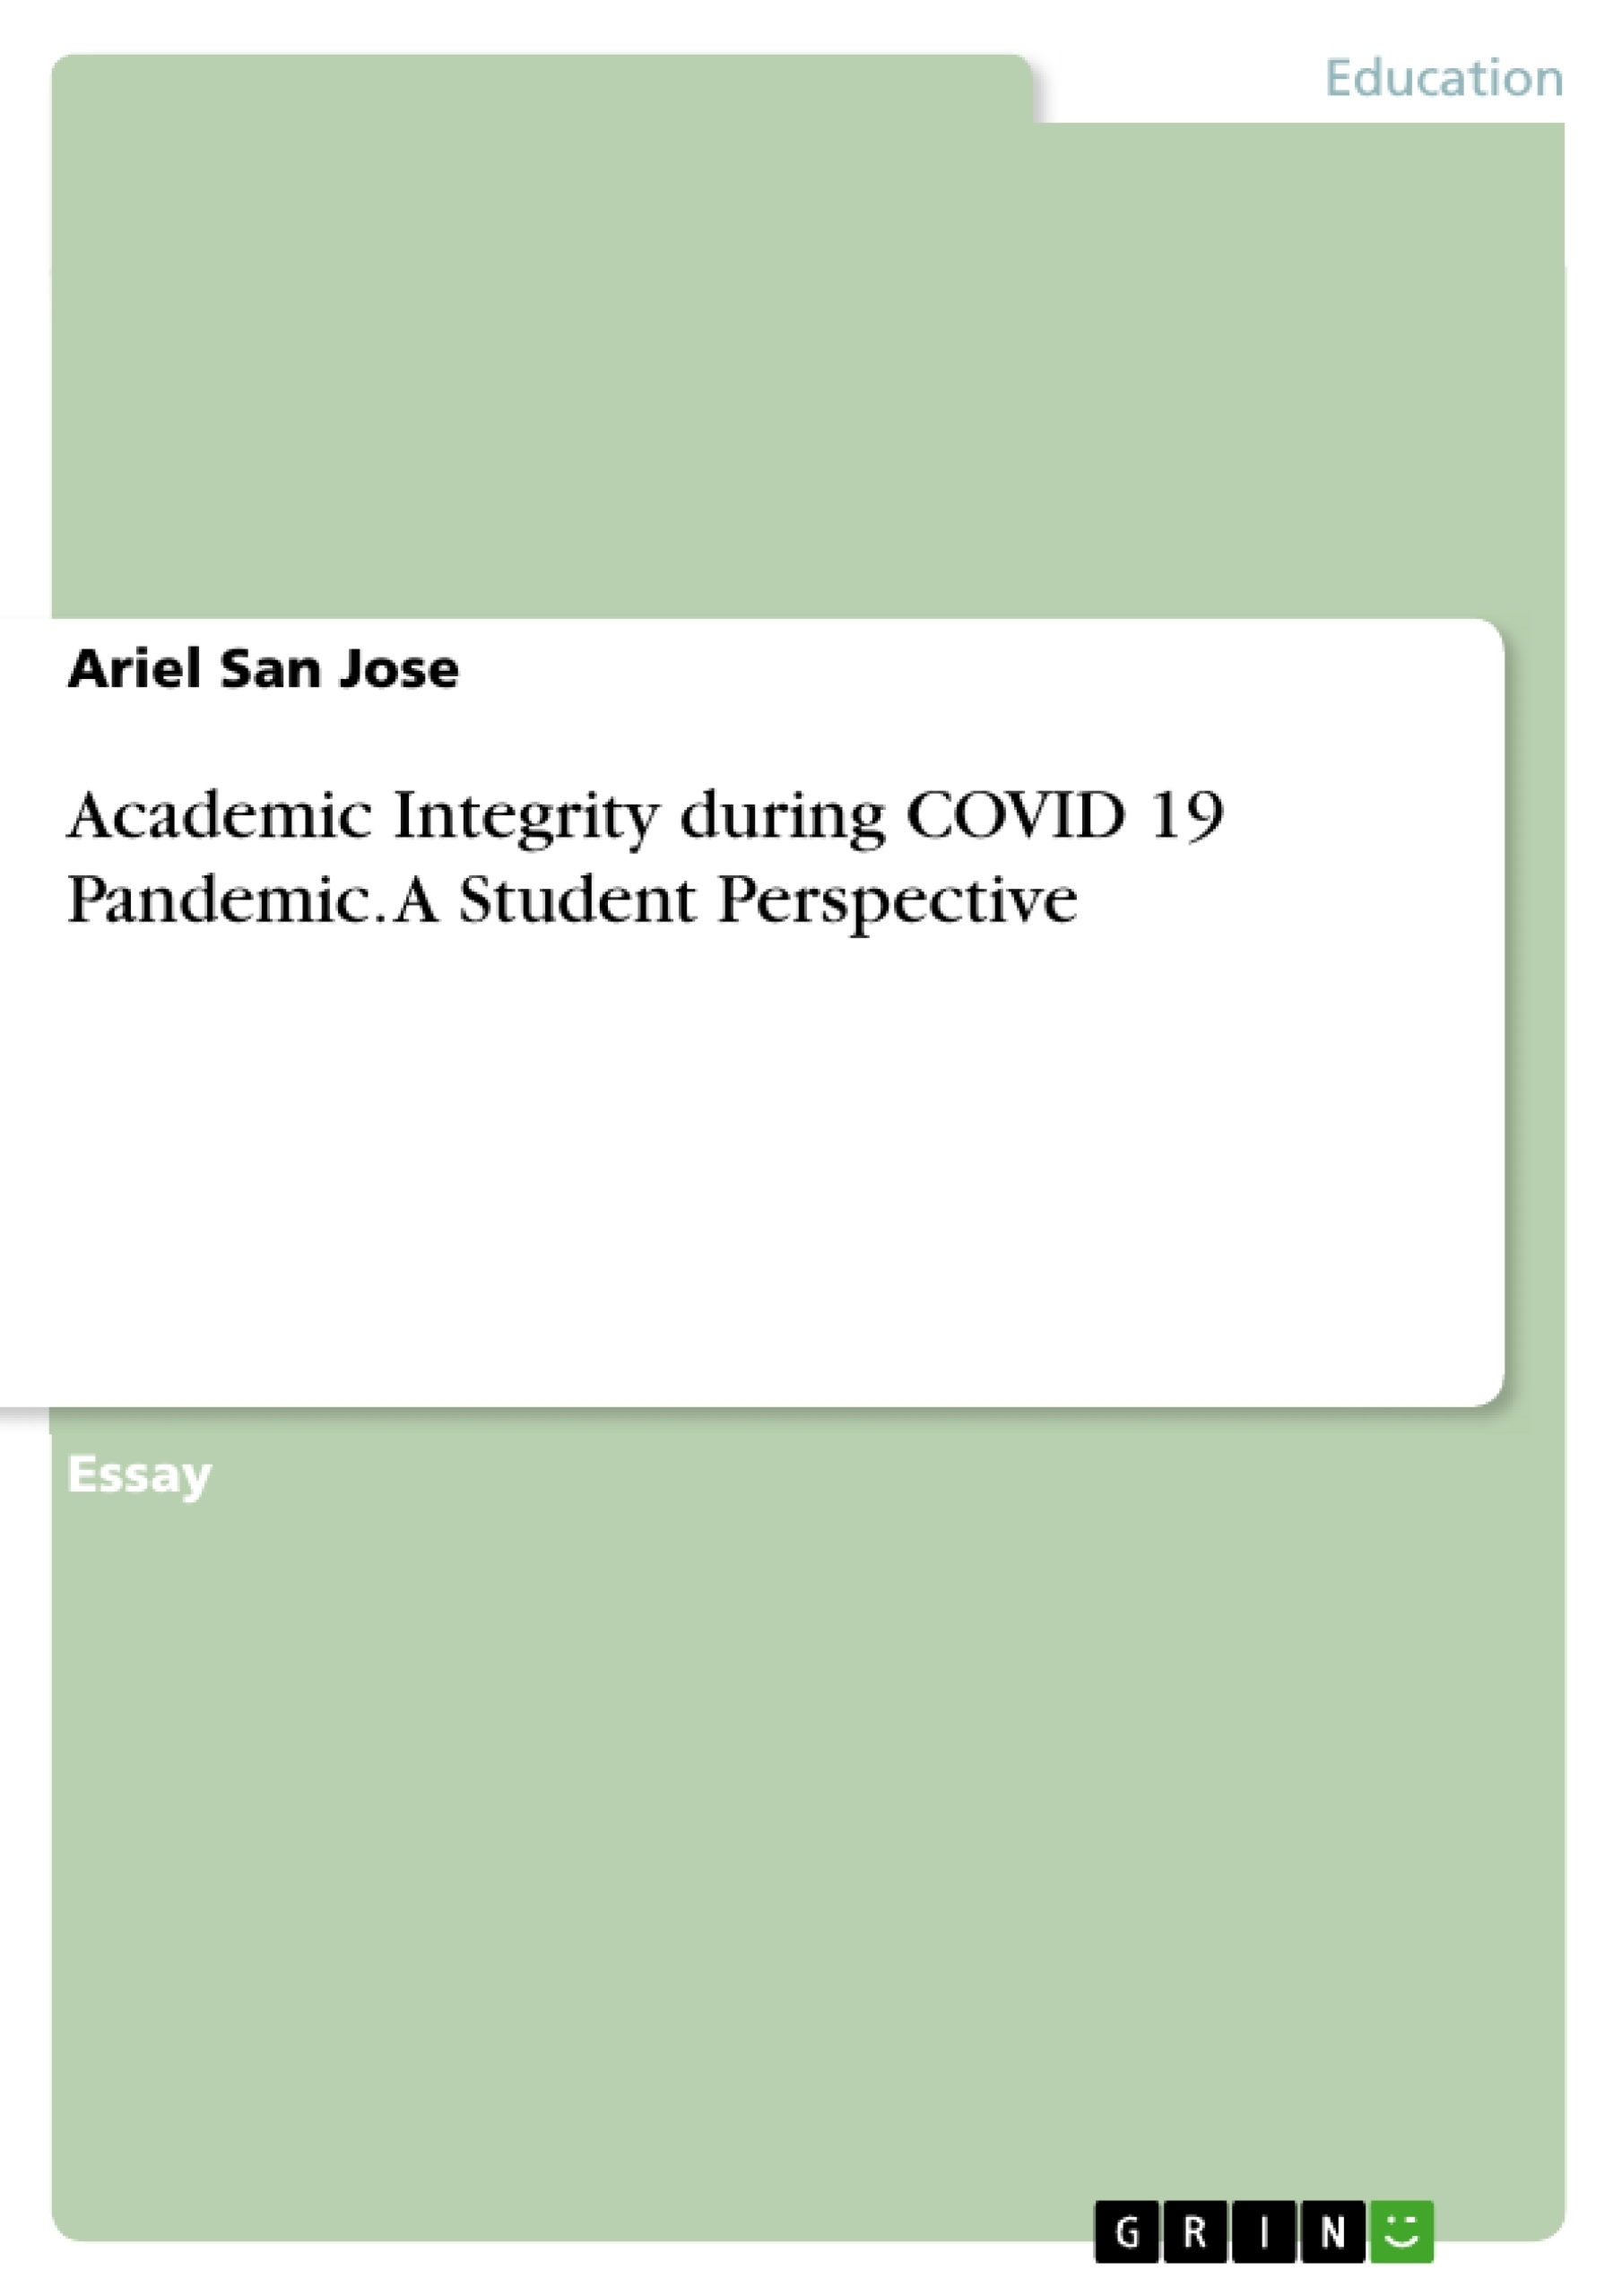 Title: Academic Integrity during COVID 19 Pandemic. A Student Perspective